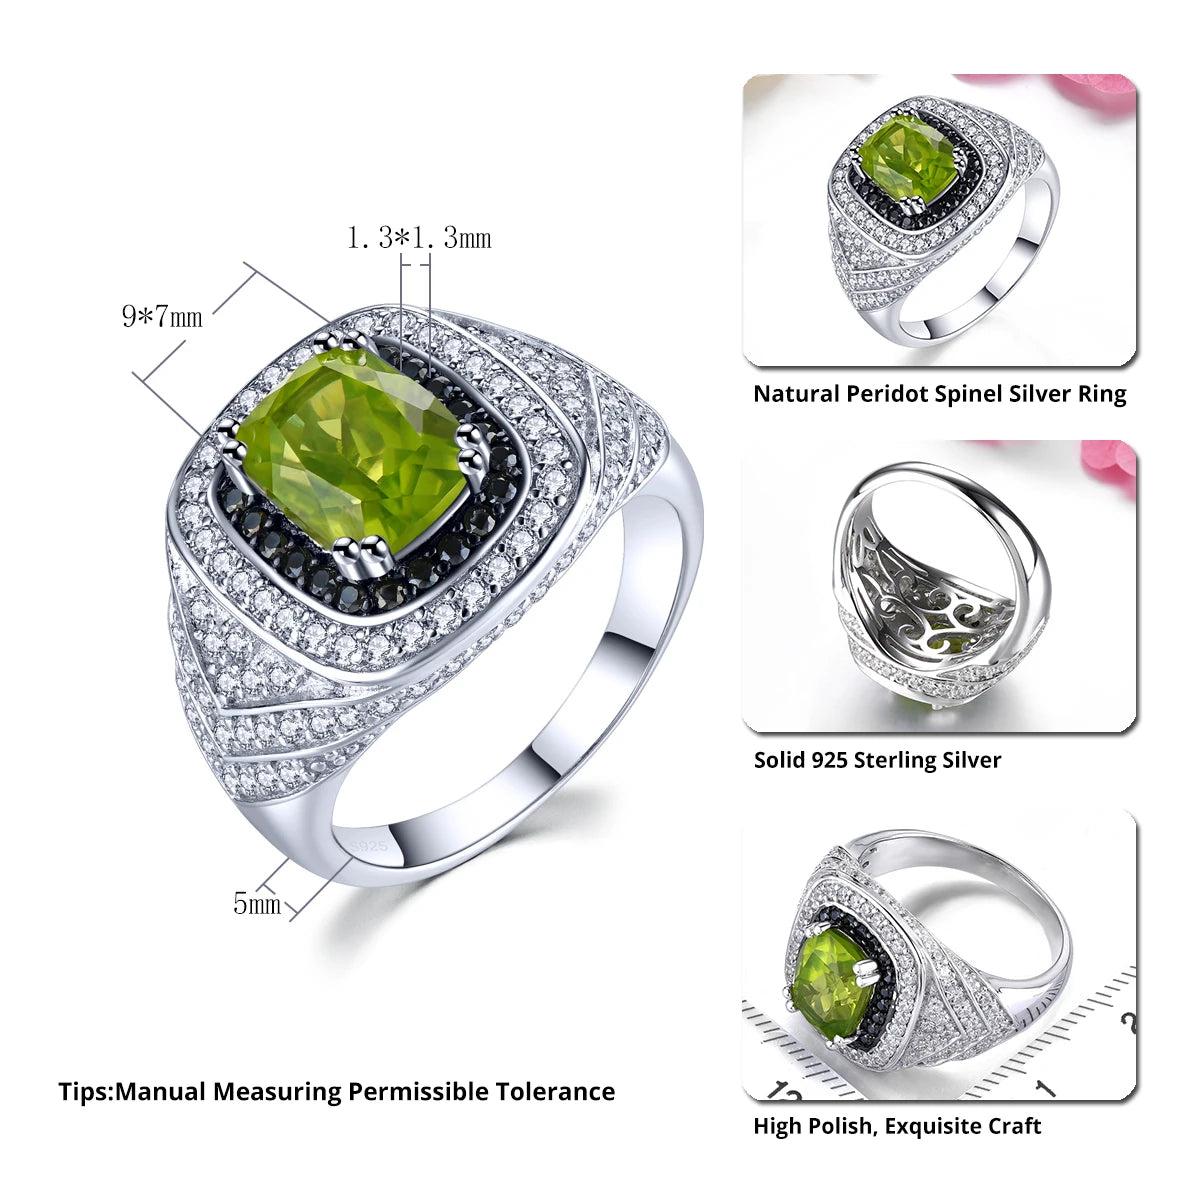 Natural Peridot Black Spinel Solid Sterling Silver Rings Unisex Style 3.2 Carats Genuine Gemstone Original Design Anniversary